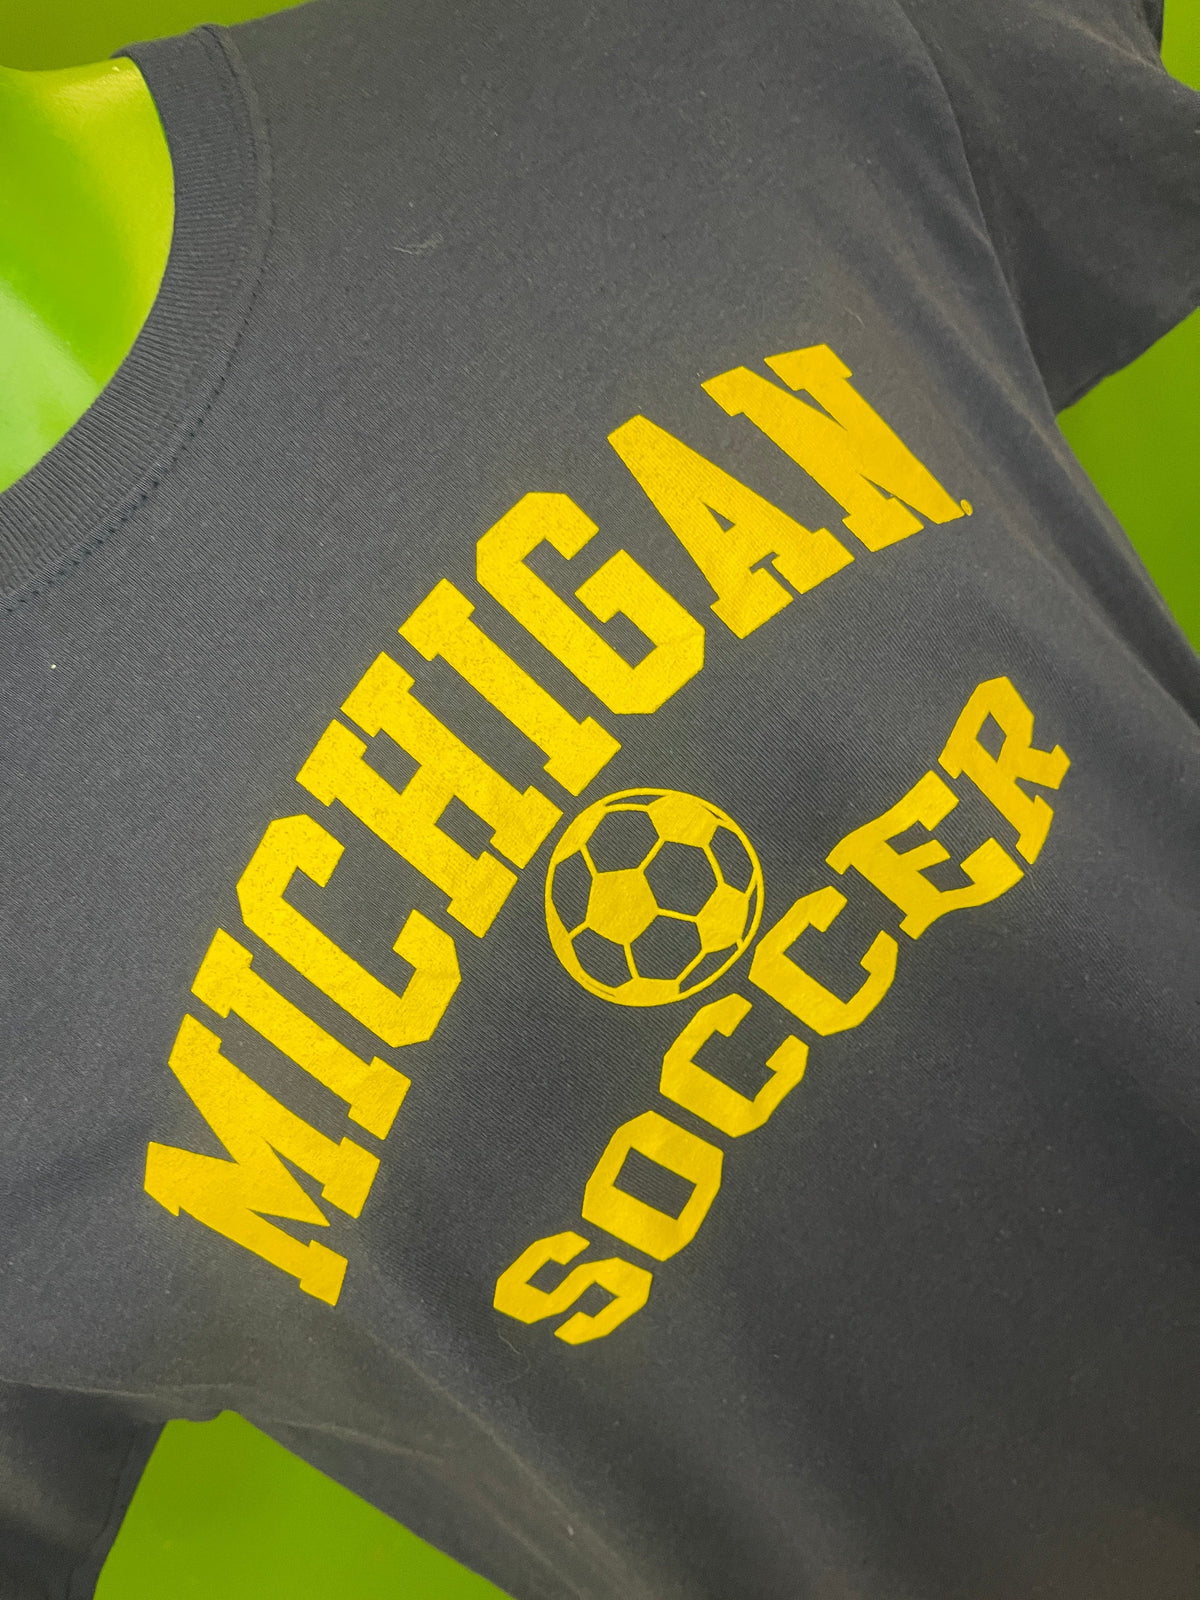 NCAA Michigan Wolverines Soccer T-Shirt Youth Large 14-16 NWT